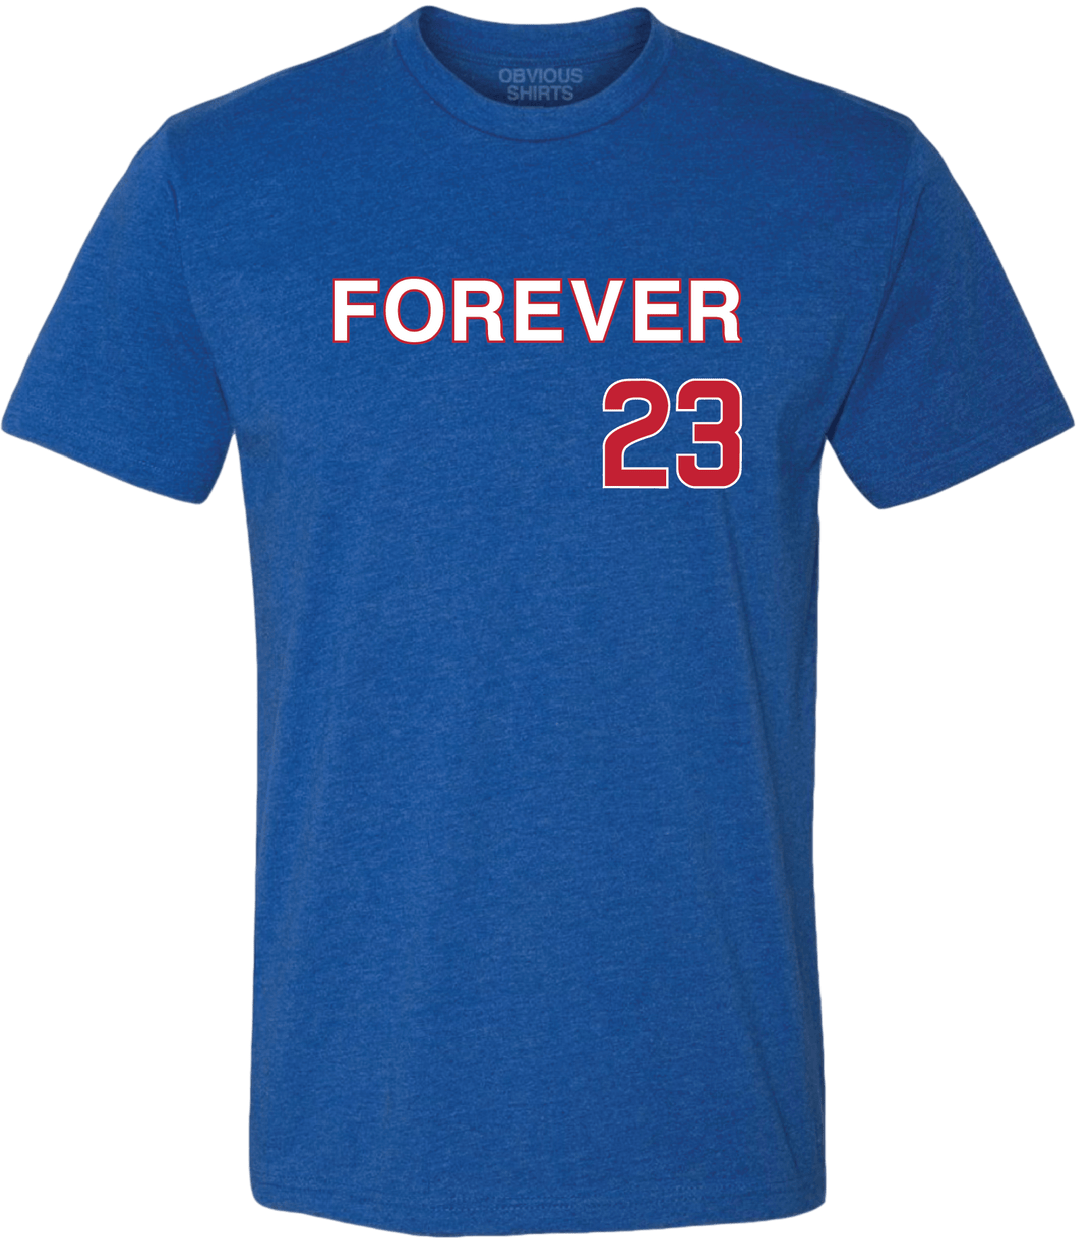 FOREVER 23 - OBVIOUS SHIRTS